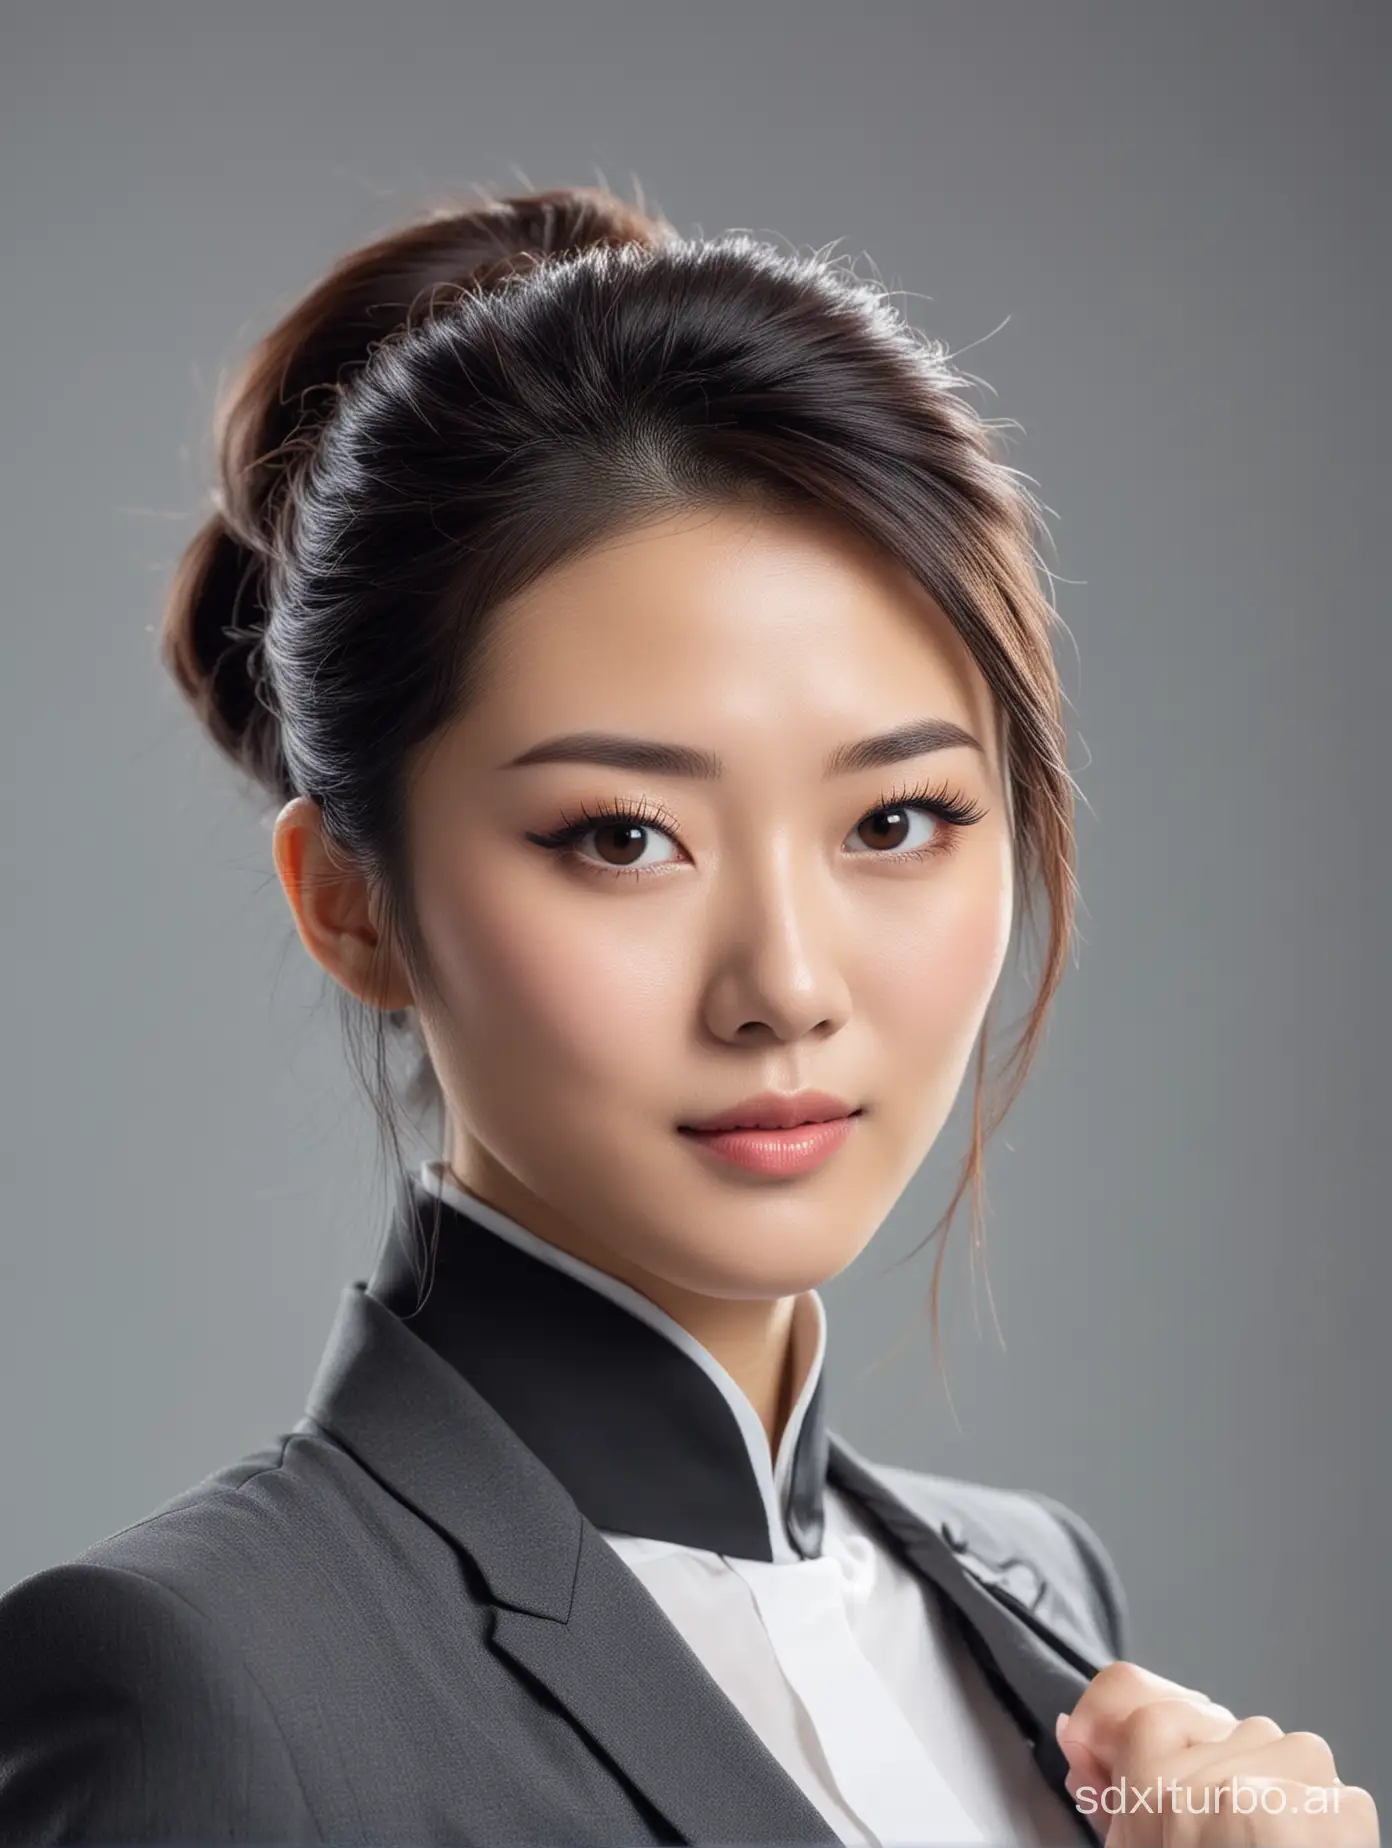 A Chinese beauty wearing professional attire, looking at the camera, mid shot